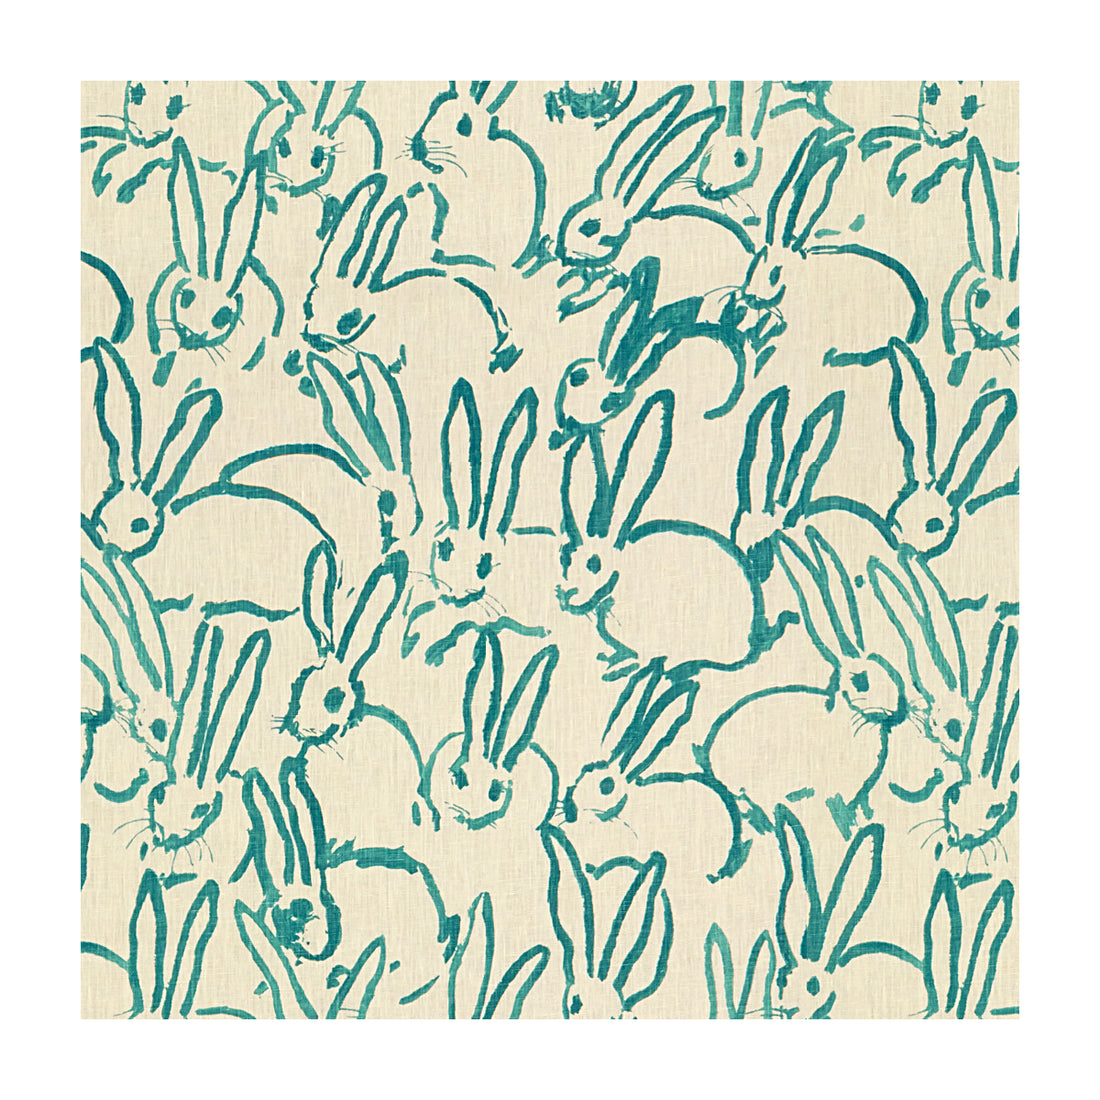 Hutch Print fabric in turquoise color - pattern GWF-3523.13.0 - by Lee Jofa Modern in the Hunt Slonem For Groundworks collection